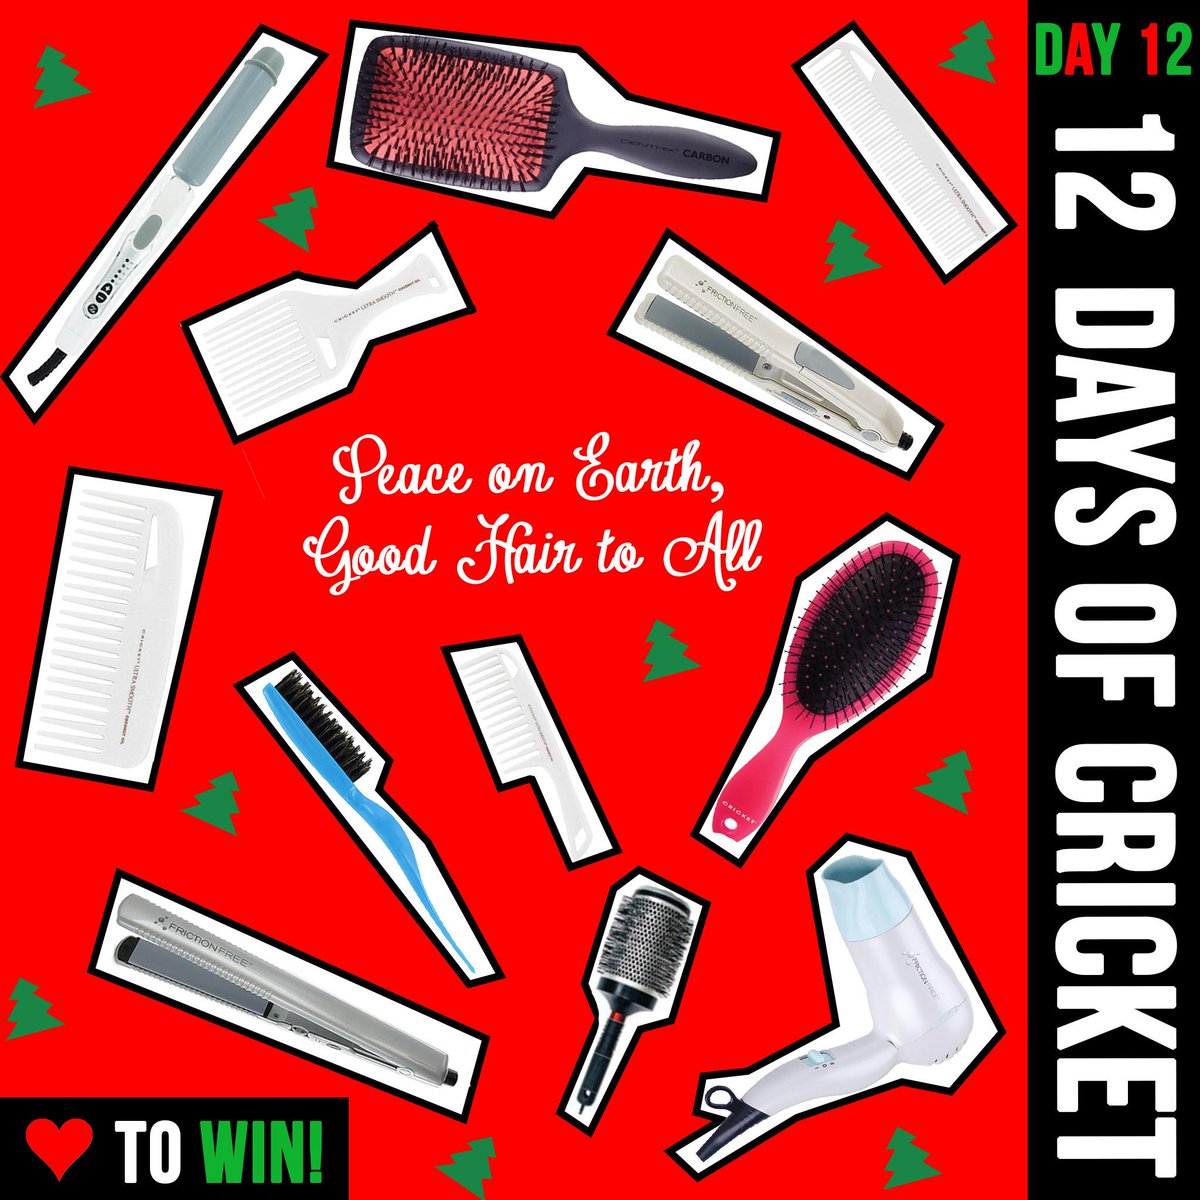 #DAY12 Final day to win in #12DaysOfCricket! Follow us on Insta to see if this HUGE prize is your early Xmas present.